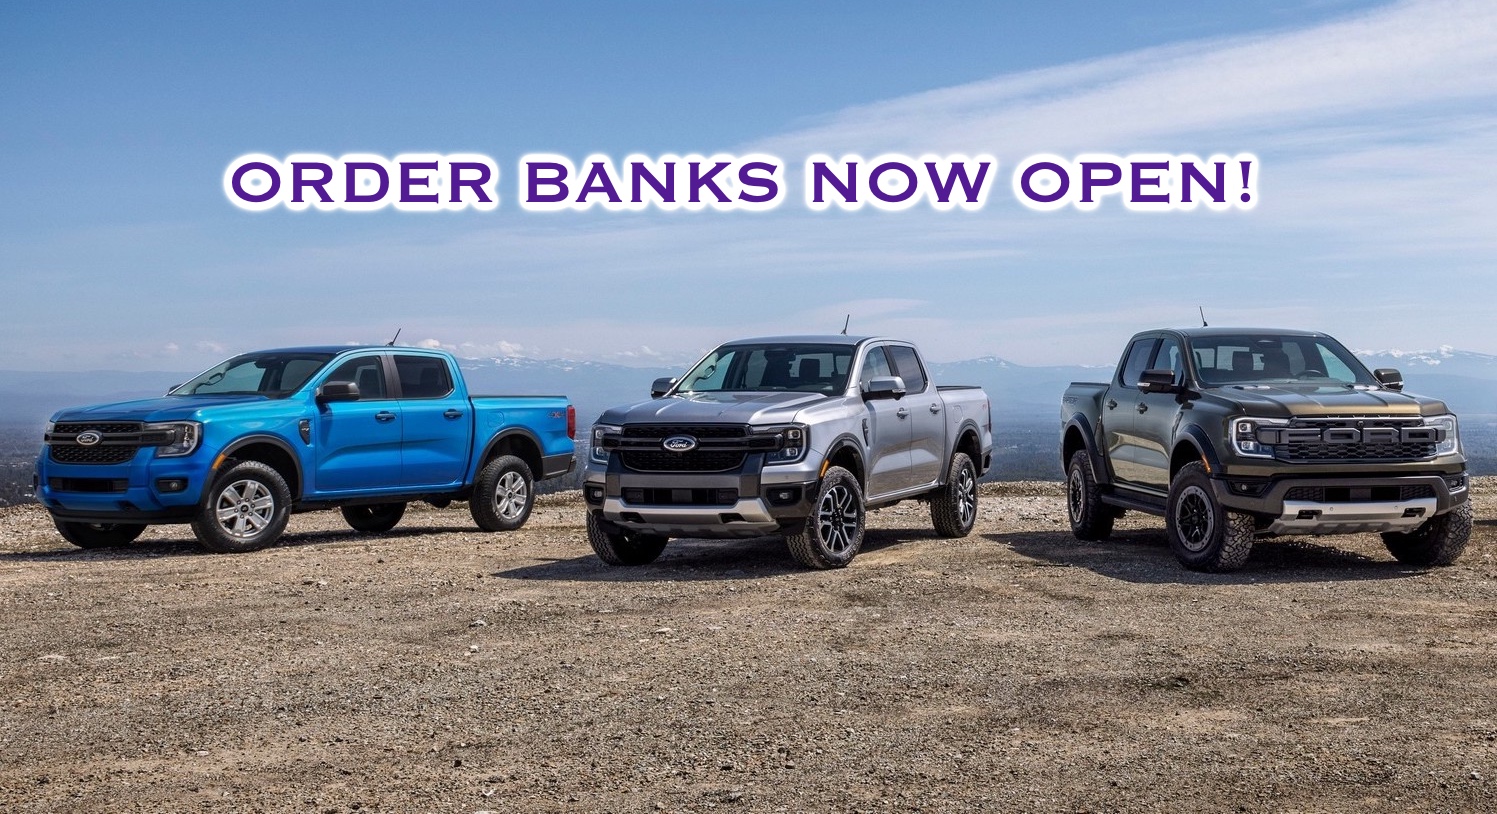 Placed my 2024 Ranger Raptor order @ MSRP. There are still honest  dealerships out there.